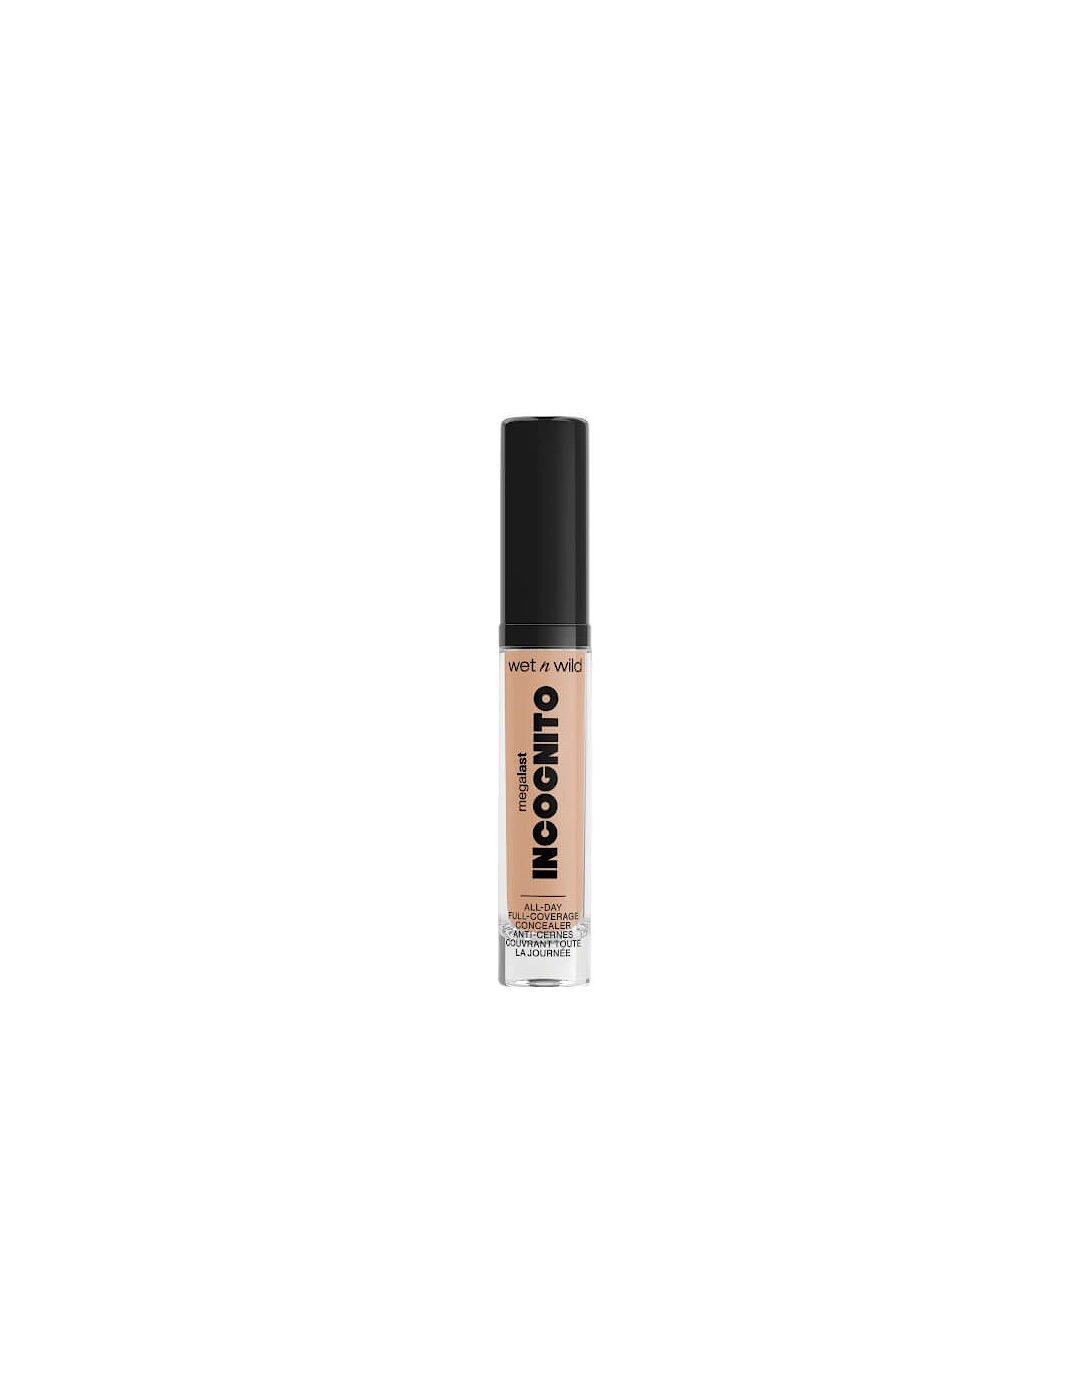 wet n wild Megalast Incognito Full-Coverage Concealer - Medium Neutral, 2 of 1